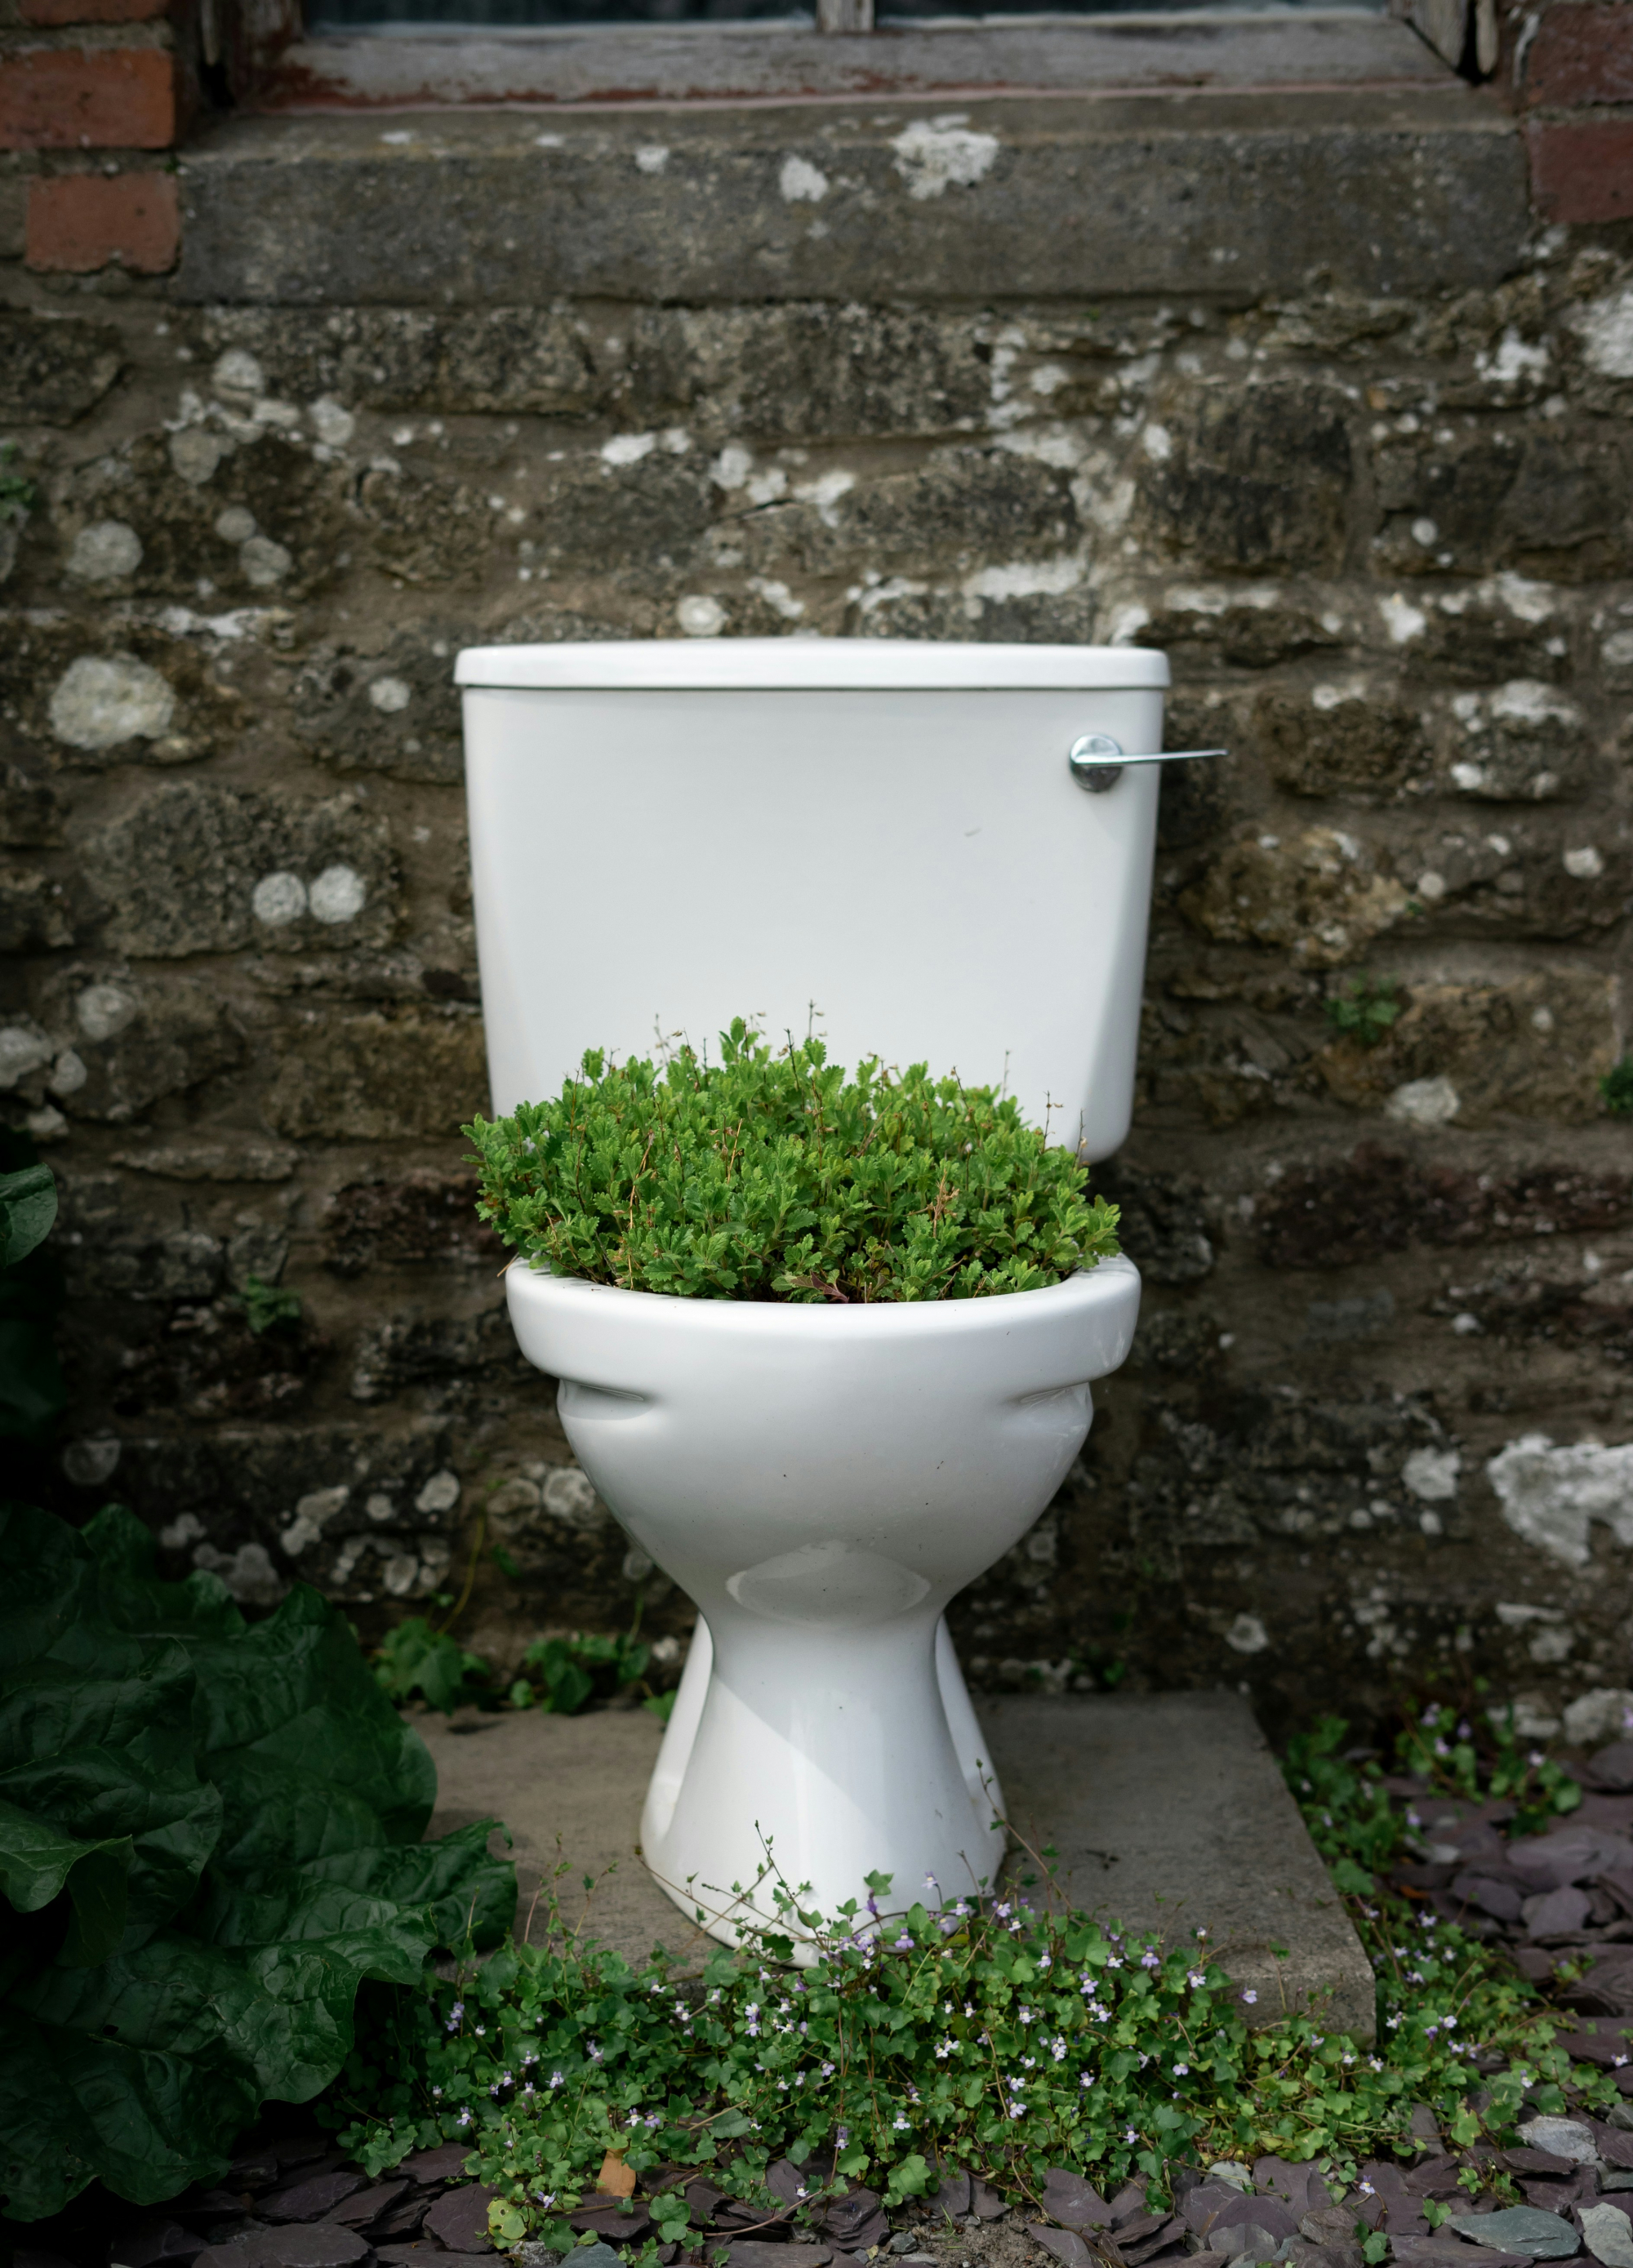 Symbolic representation of relief and renewal in bladder health through Pelvic Floor Physical Therapy – a toilet with vibrant greenery emerging from the bowl.